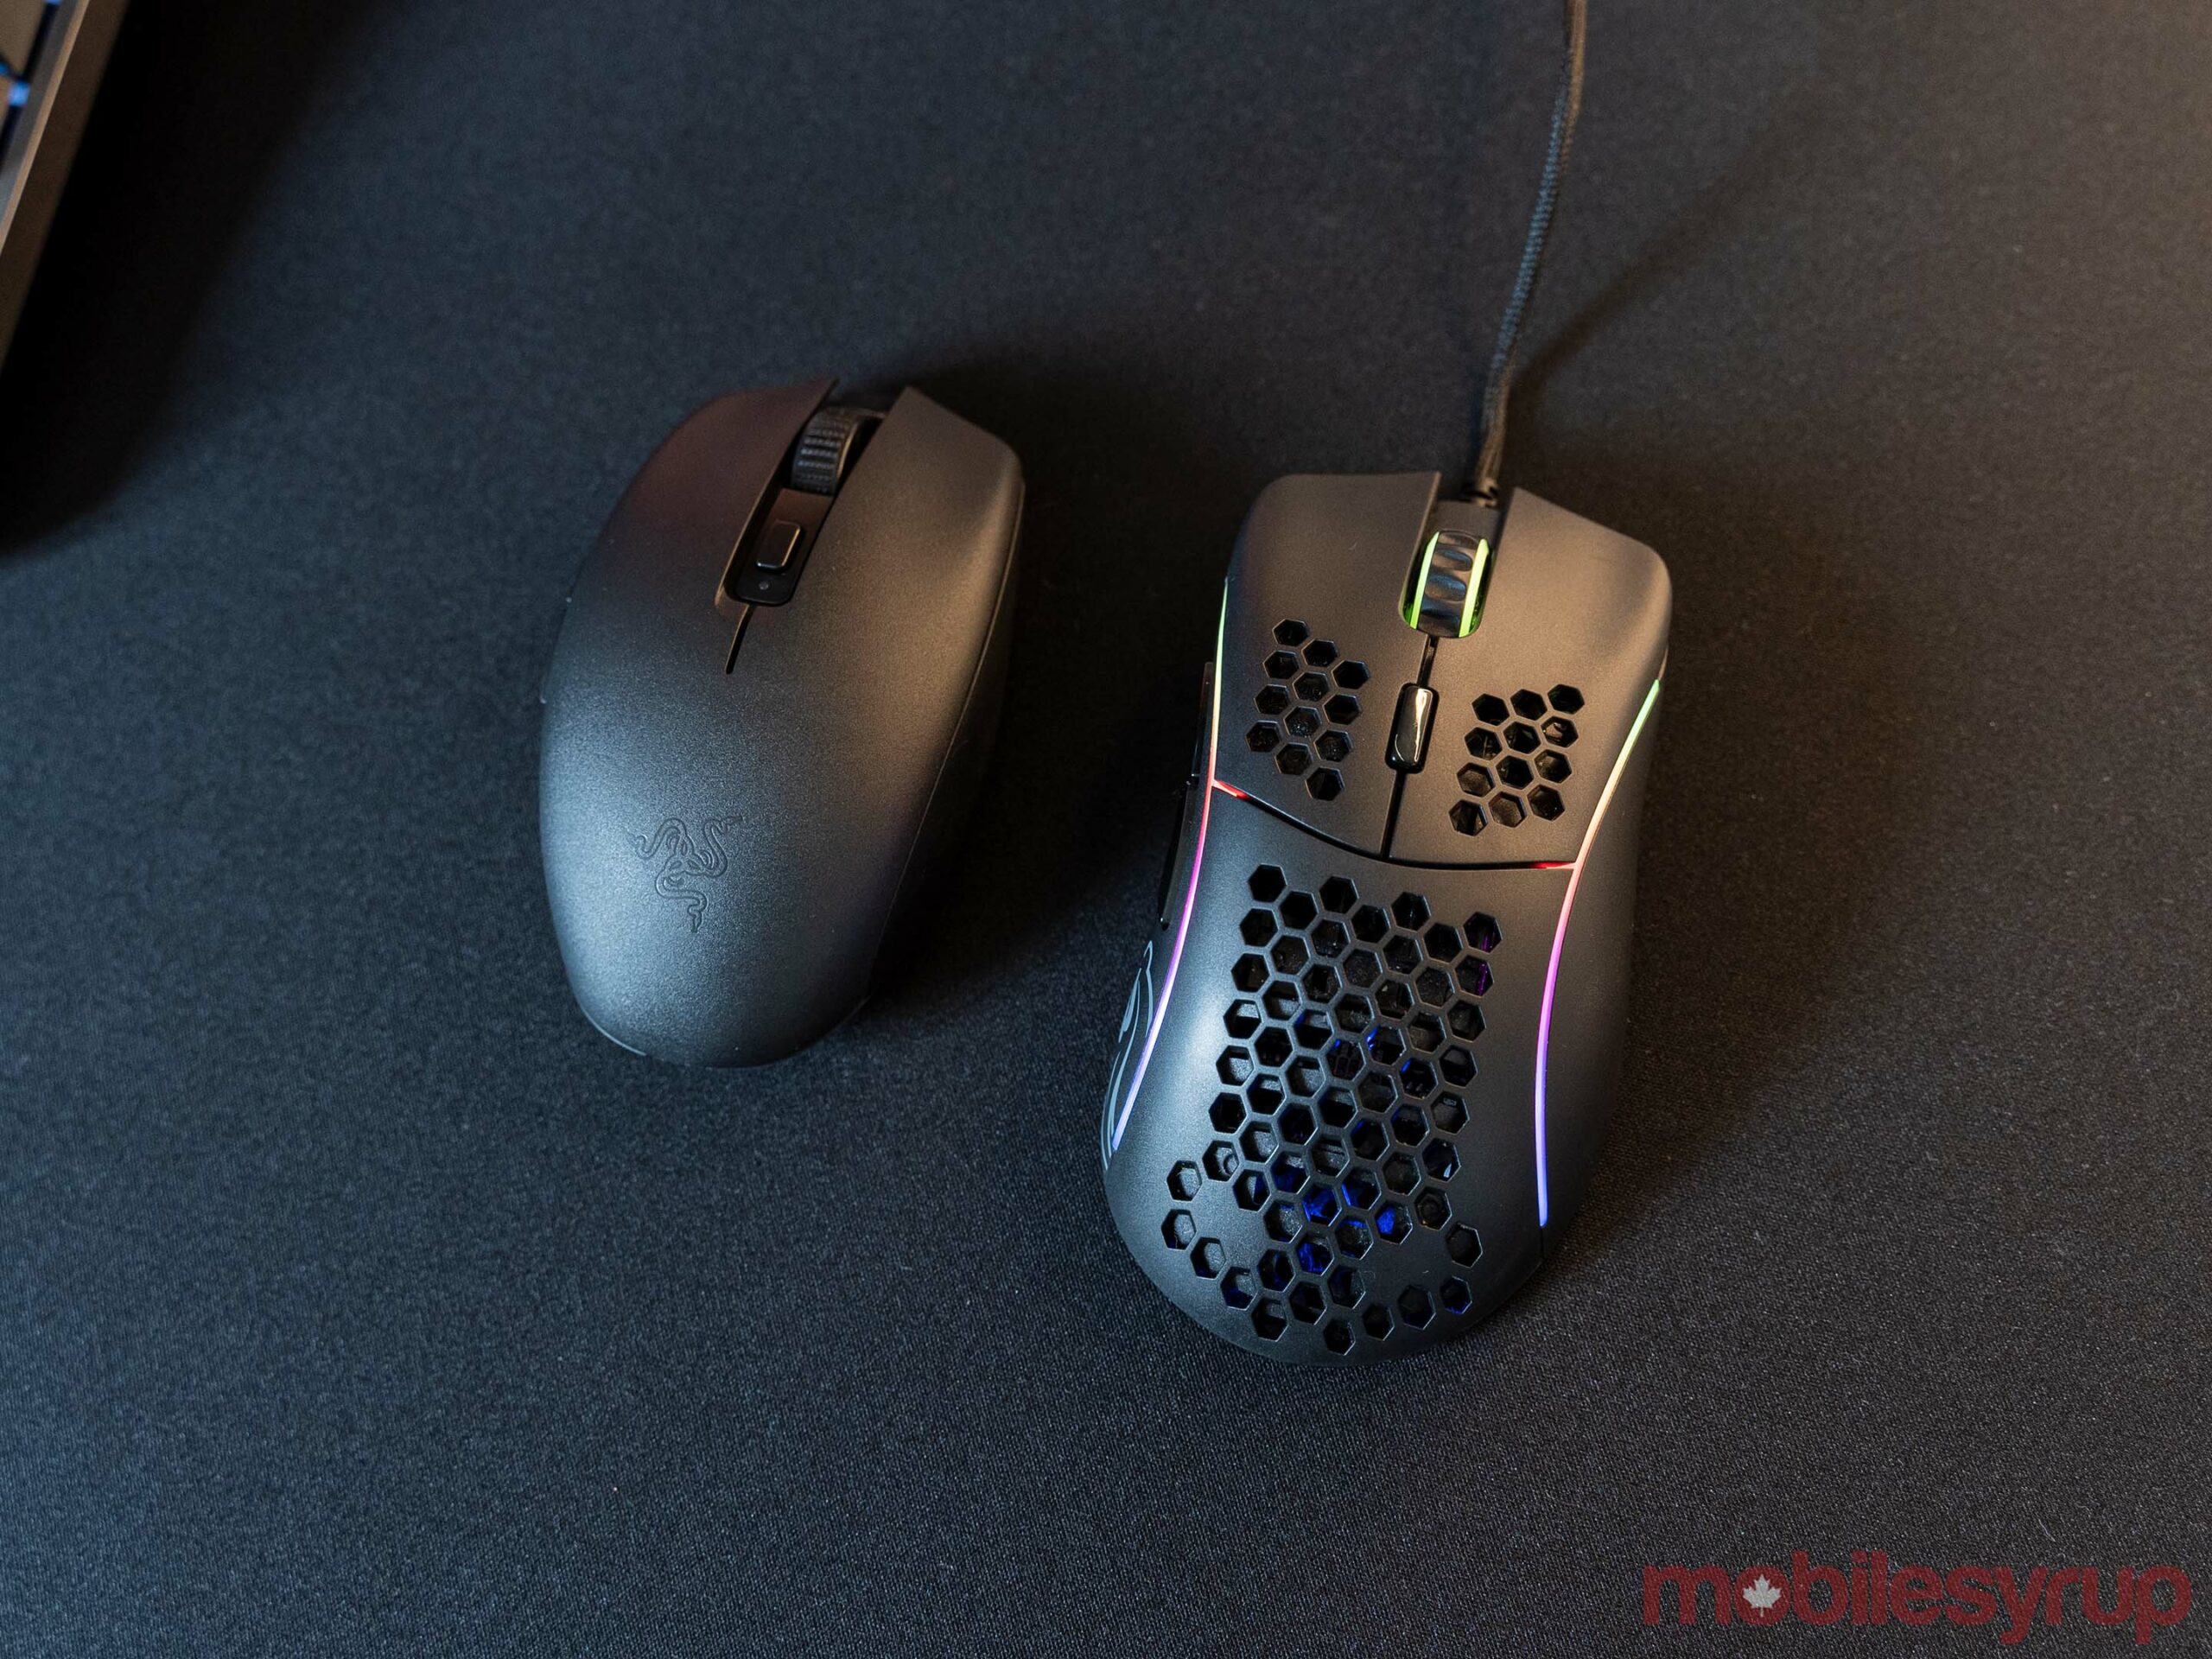 Razer's Orochi V2 Mouse Proves Wireless Mice Aren't That Bad - The Canadian